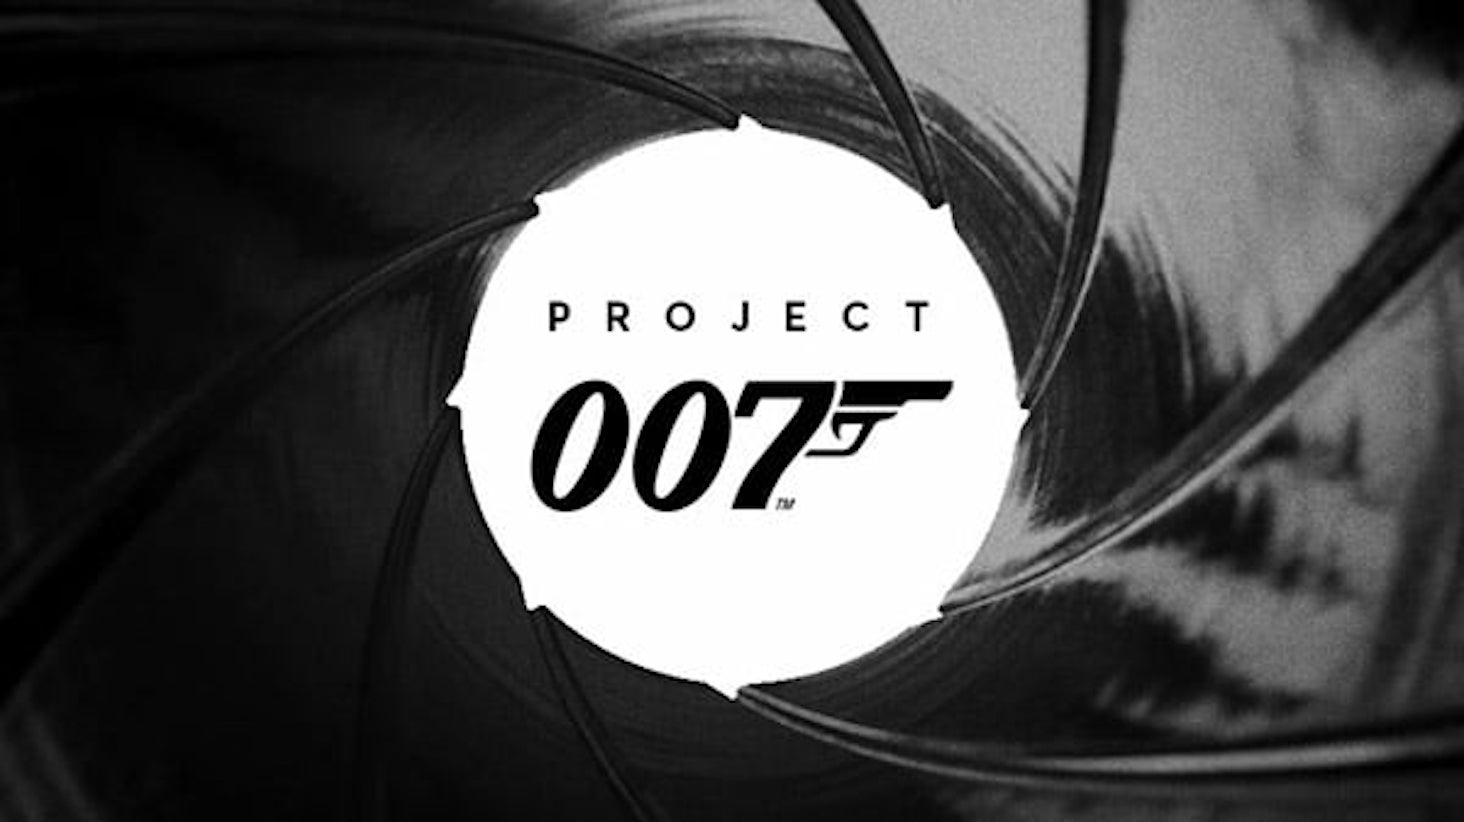 A black Project 007 appears through the barrel of a gun in the teaser trailer for IOI's James Bond